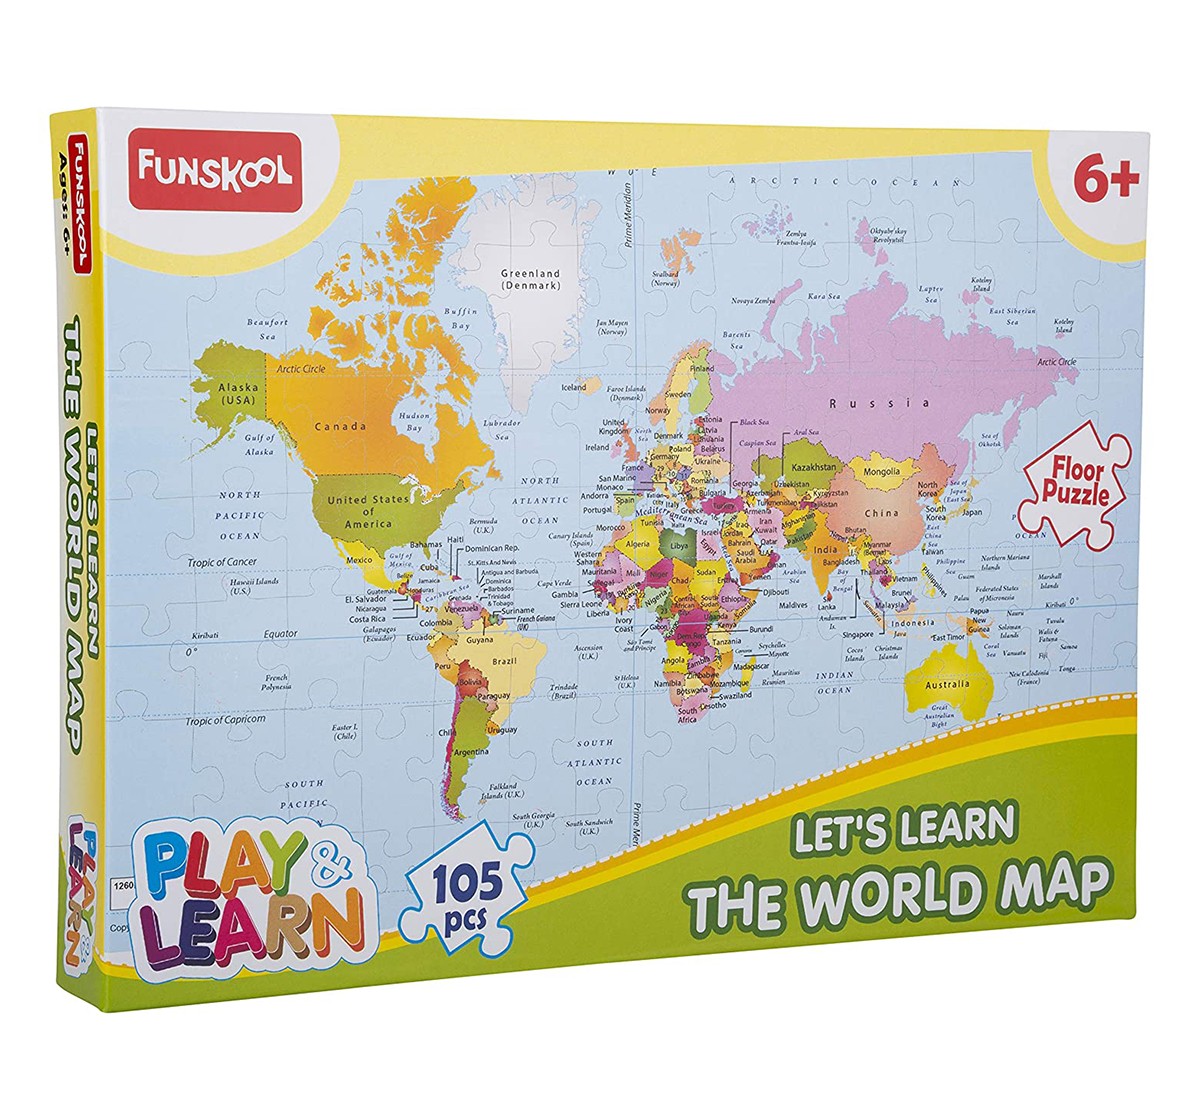 Funskool Play & Learn World Map Puzzle, Multicolor, 3Y+